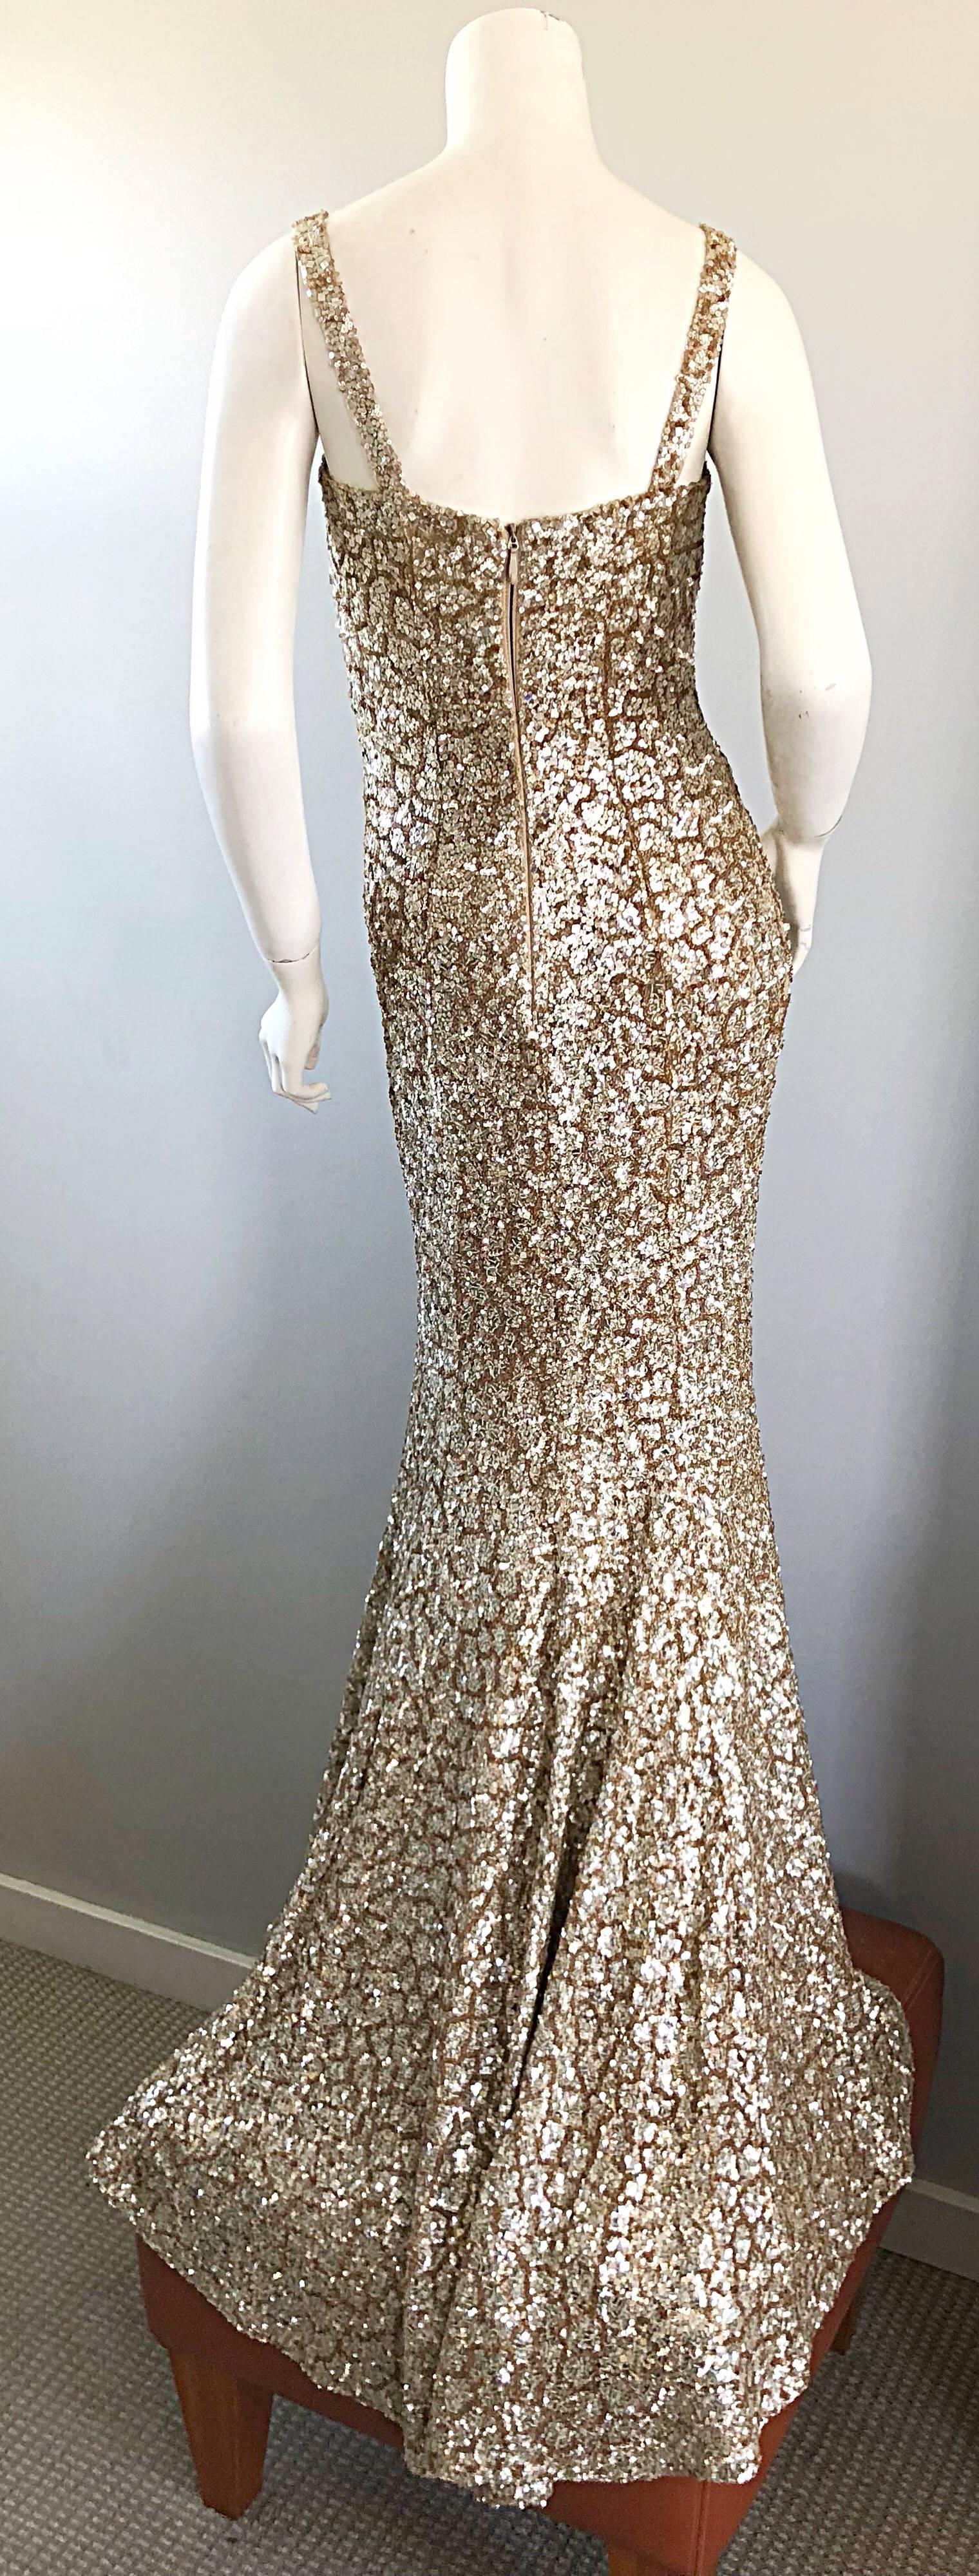 Women's Monique Lhuillier Gorgeous Resort 2012 Gold Rose Gold Full Sequin Trained Gown 